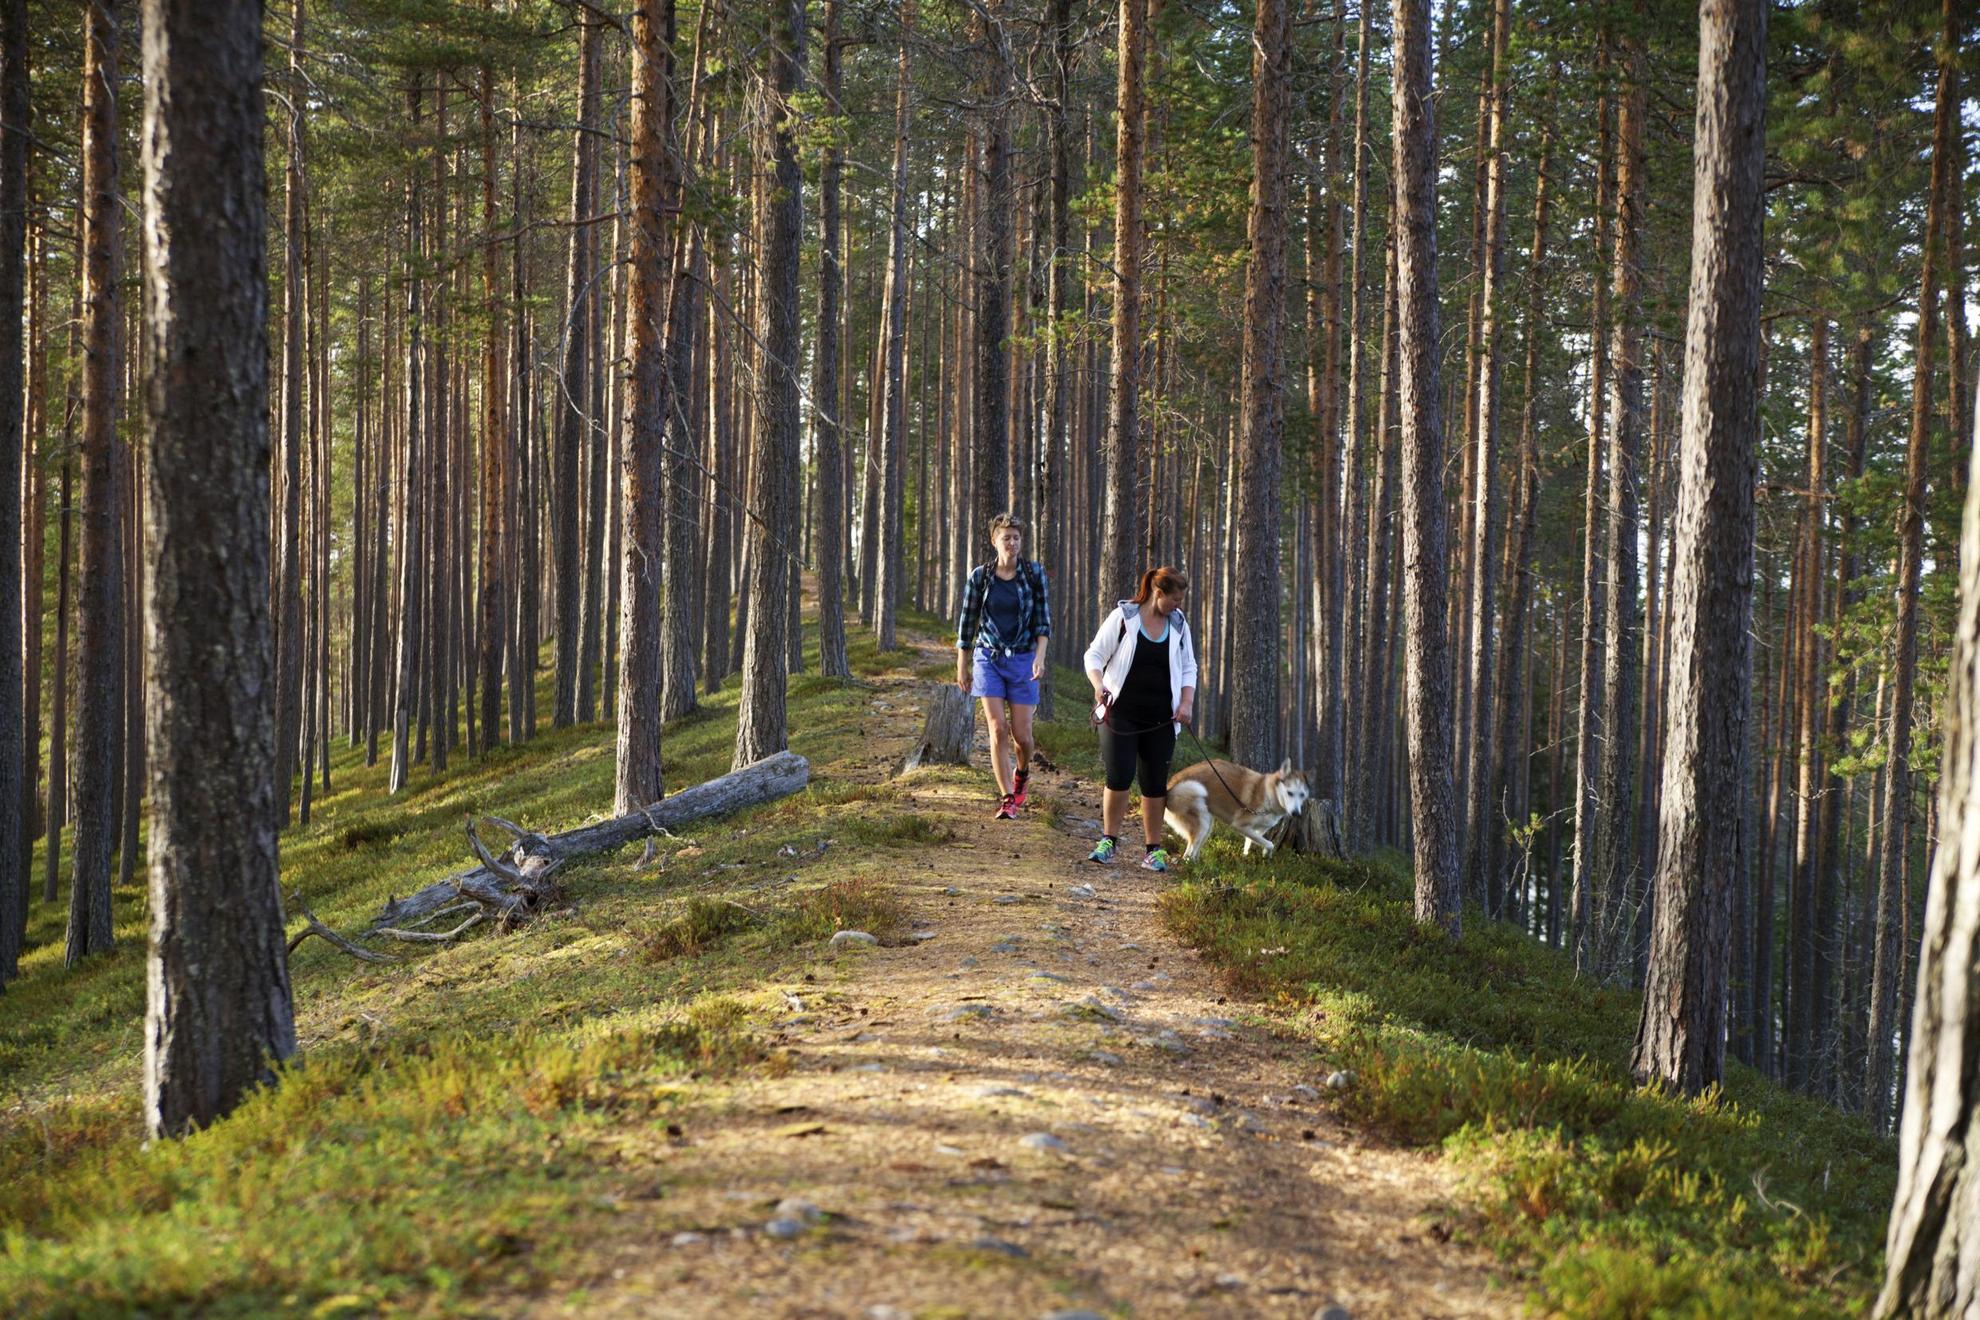 Two people with a dog on a leash walks on a hiking trail in a forest.